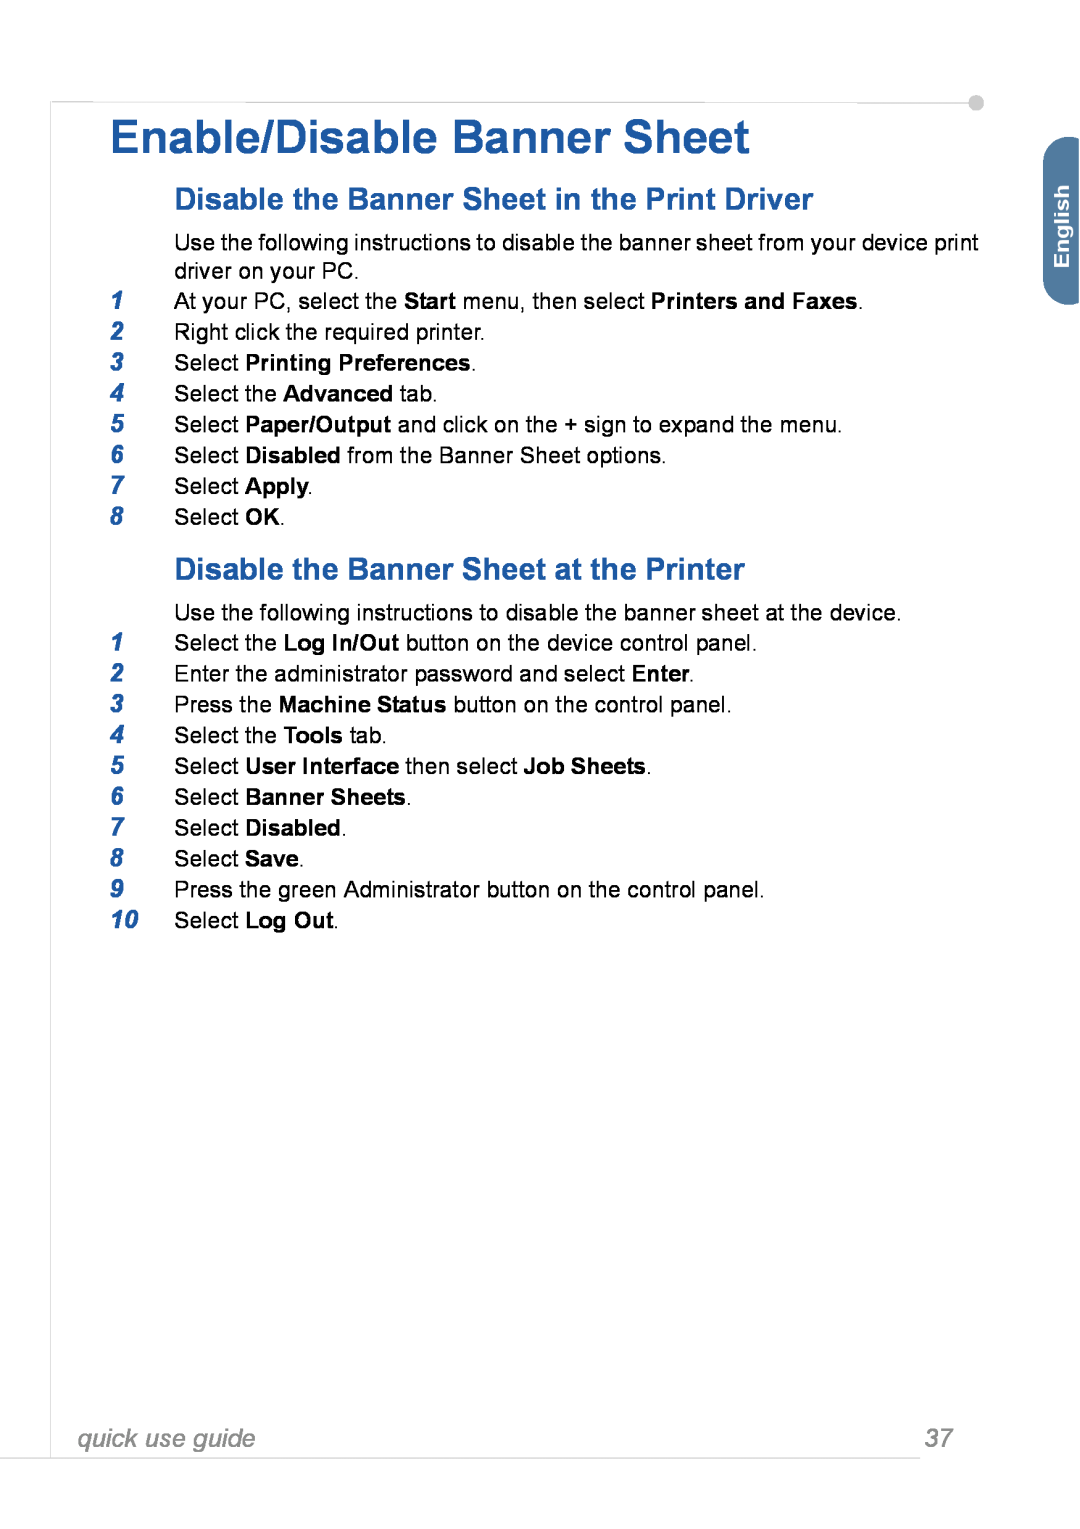 Xerox 3635MFP Enable/Disable Banner Sheet, Disable the Banner Sheet in the Print Driver, 3Select Printing Preferences 